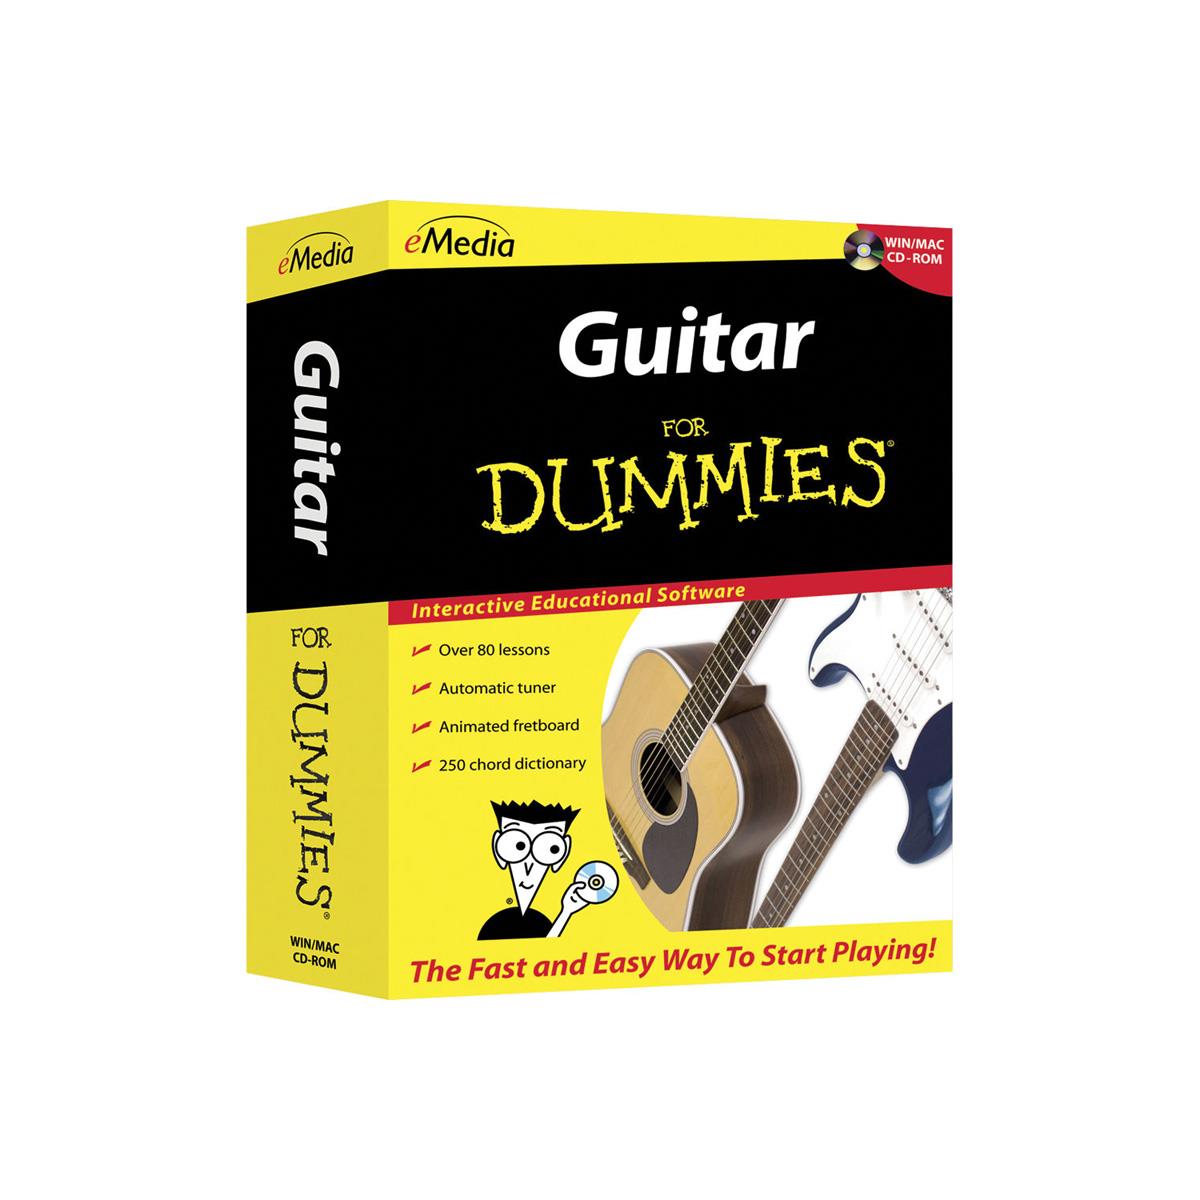 eMedia Guitar For Dummies v2 Software for Mac, Electronic Download -  FD12091DLM